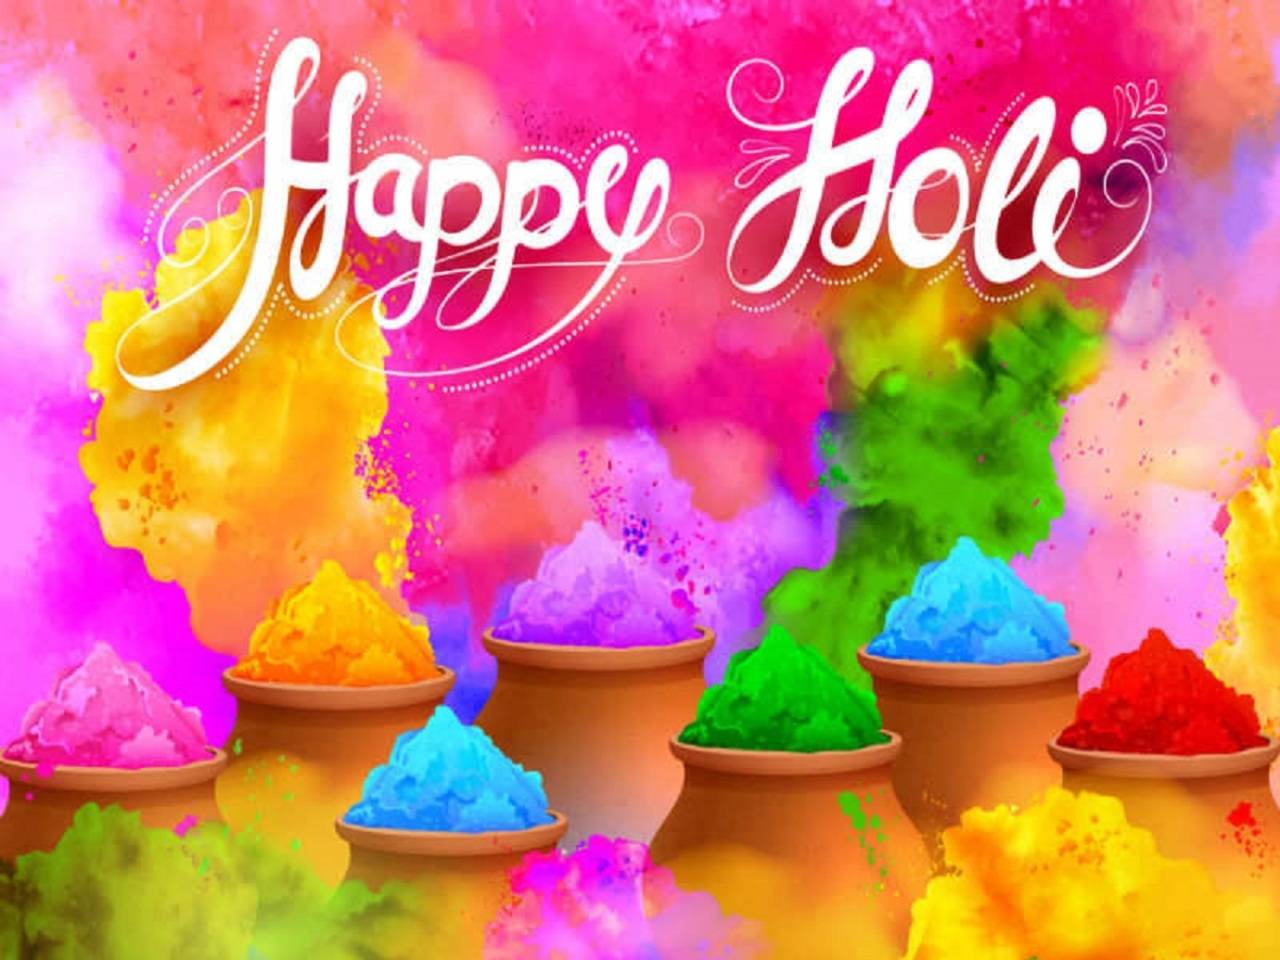 Collection of Amazing Happy Holi Images 2020 in Full 4K Quality – Over 999 Images